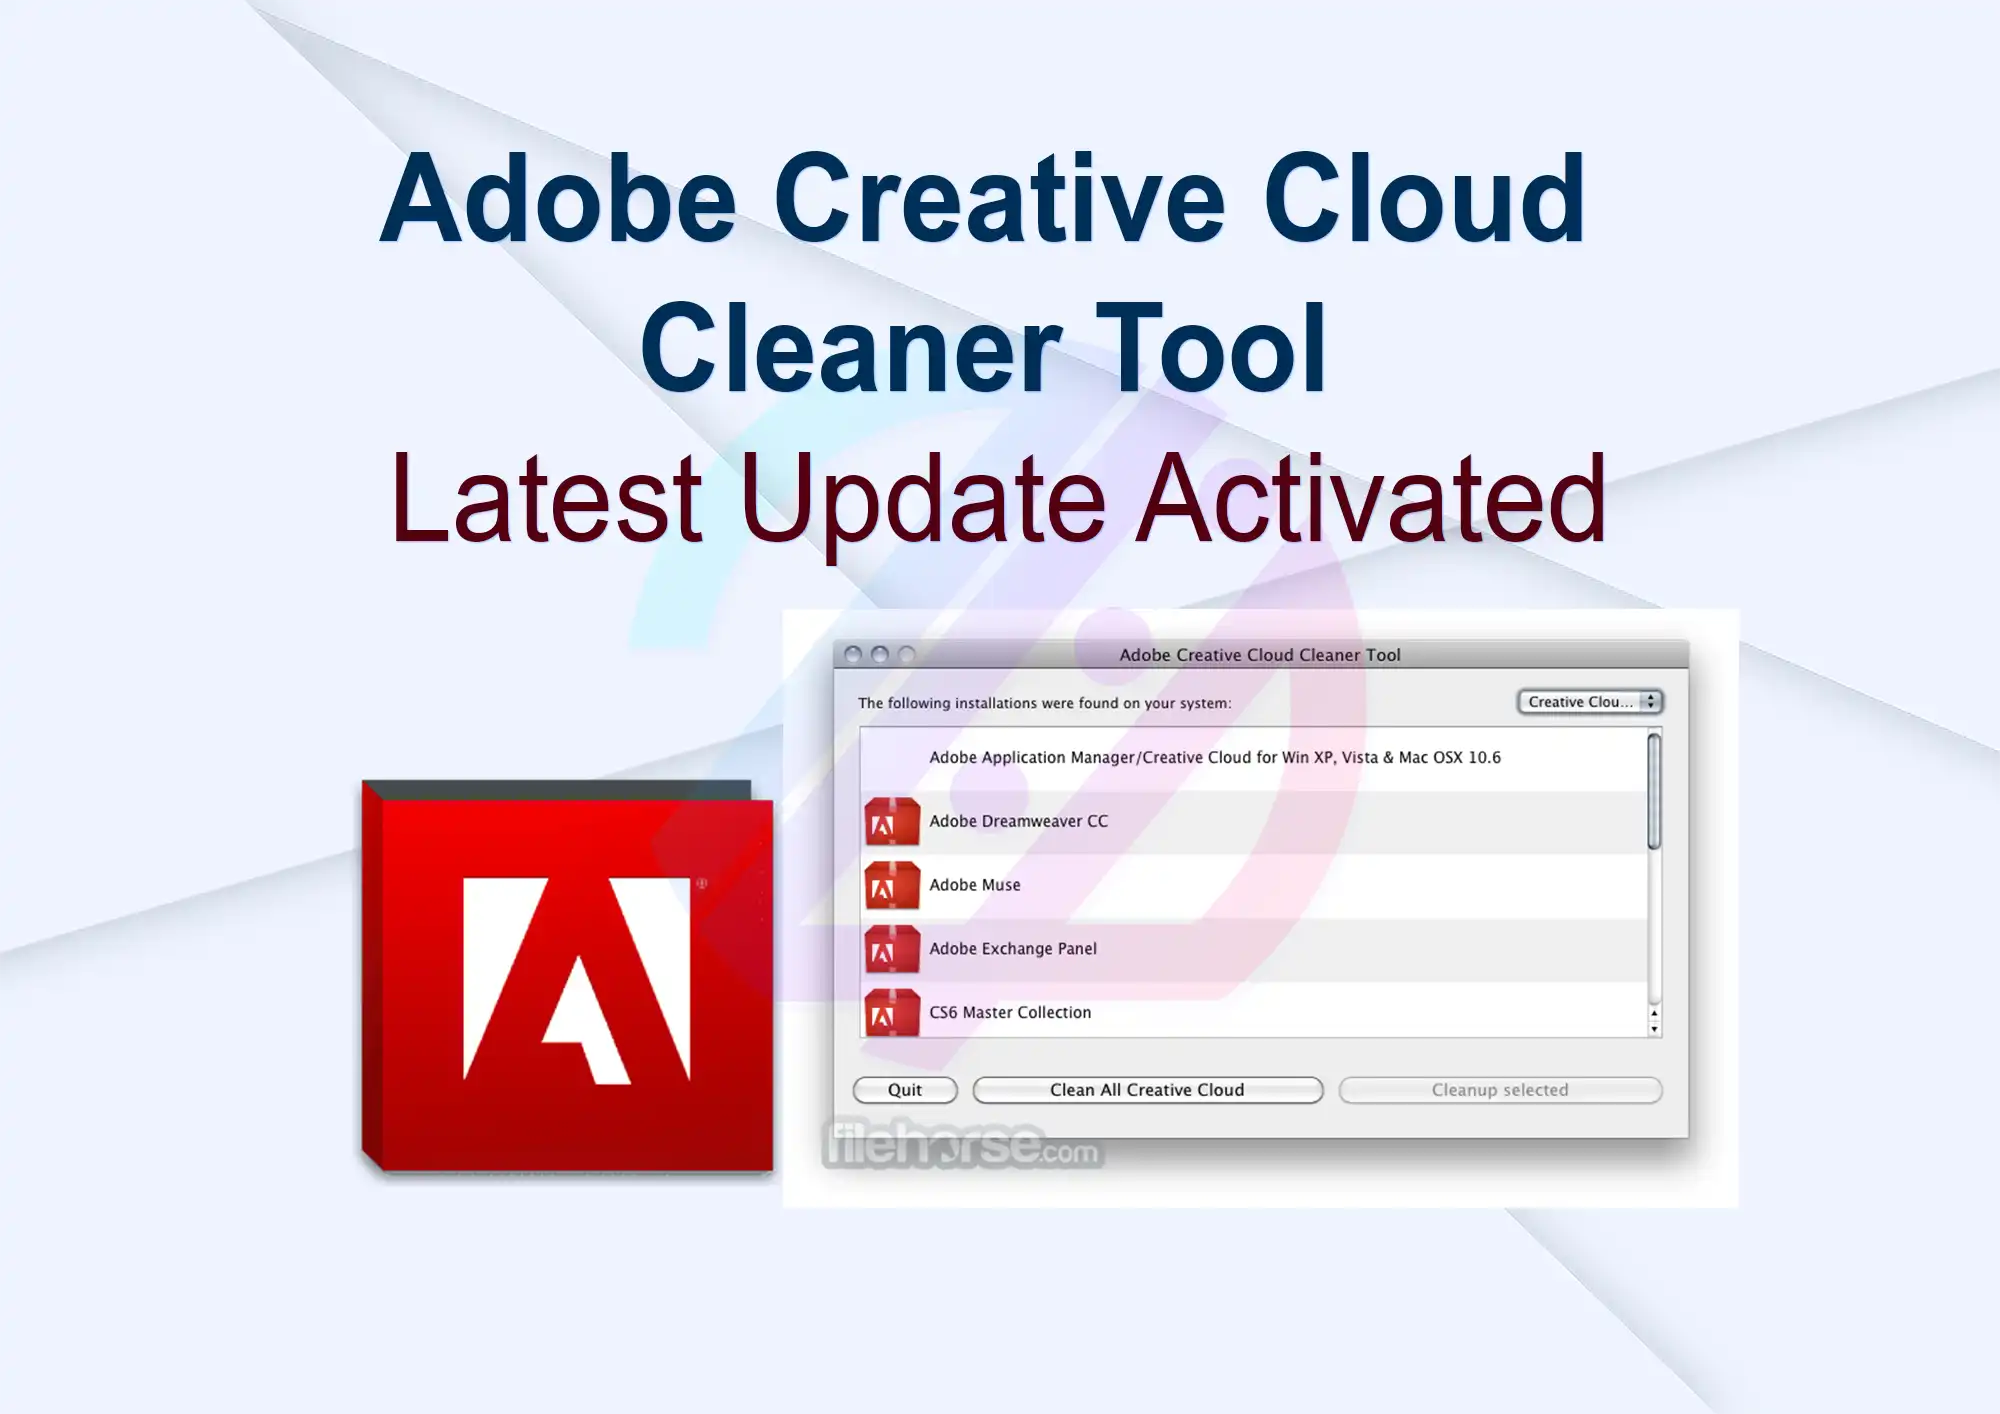 Adobe Creative Cloud Cleaner Tool Latest Update Activated